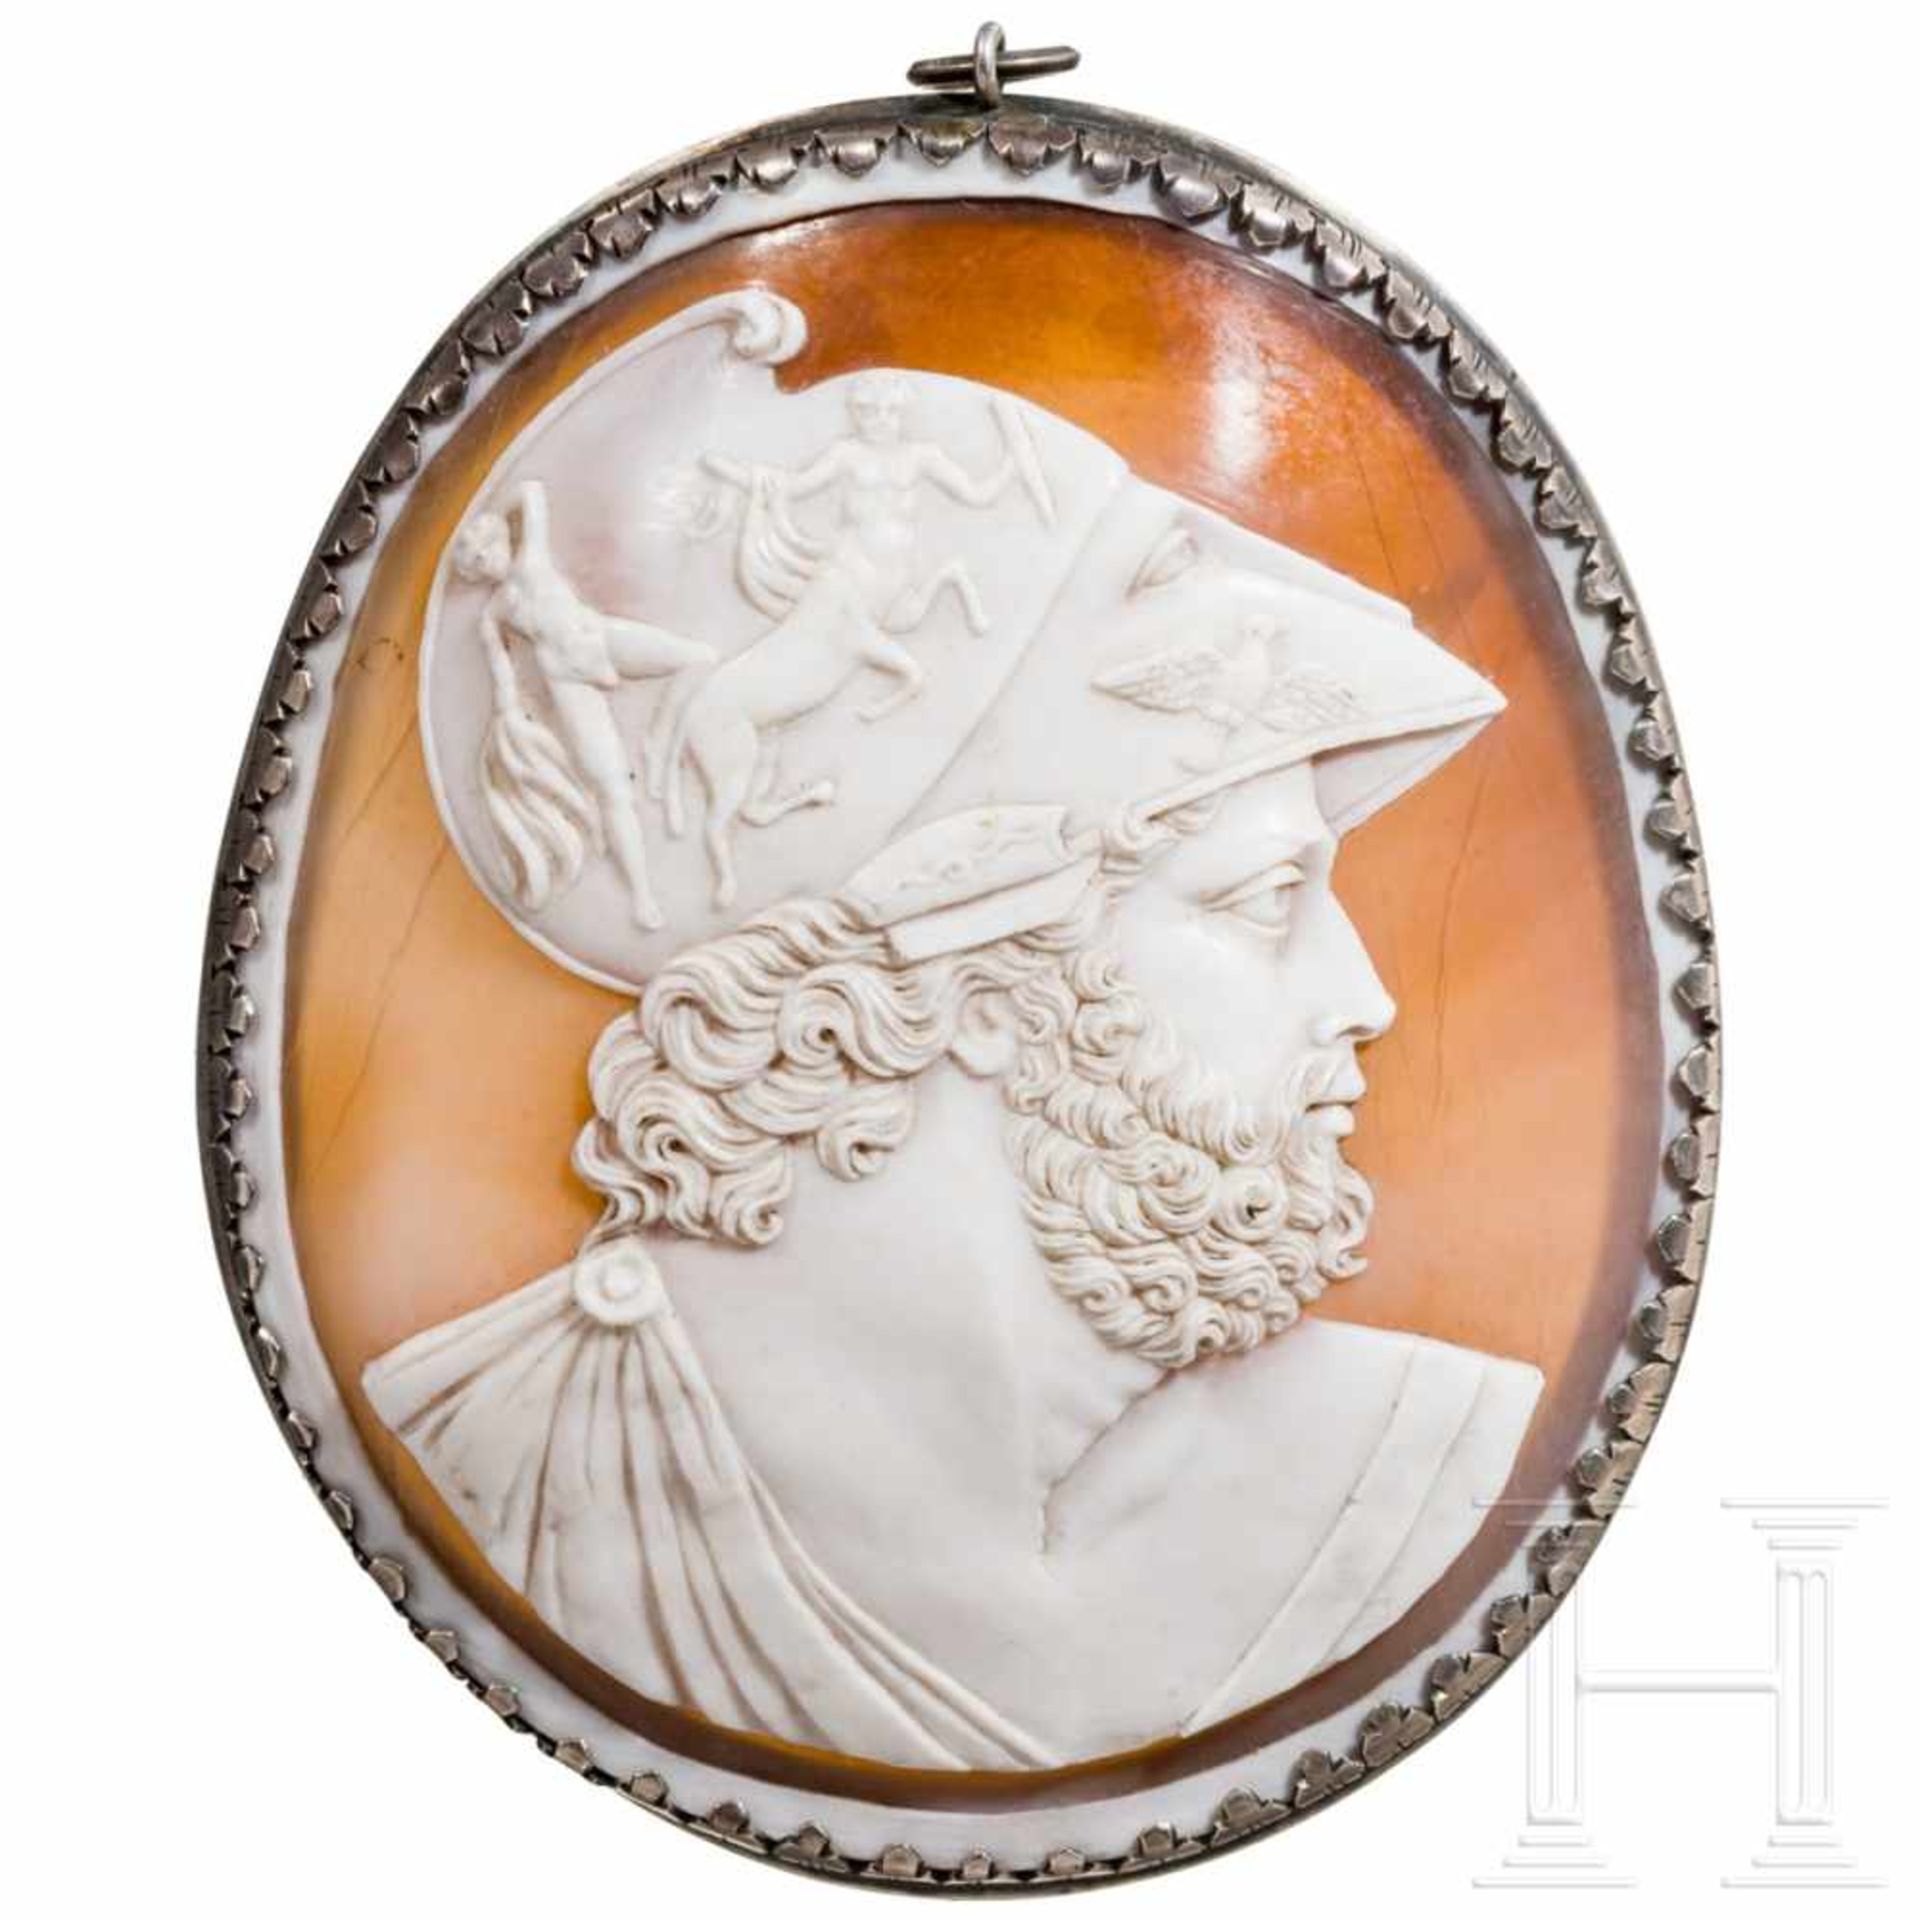 An unusually large Italian classical cameo with a relief of Menelaus, 19th centuryThe large, oval